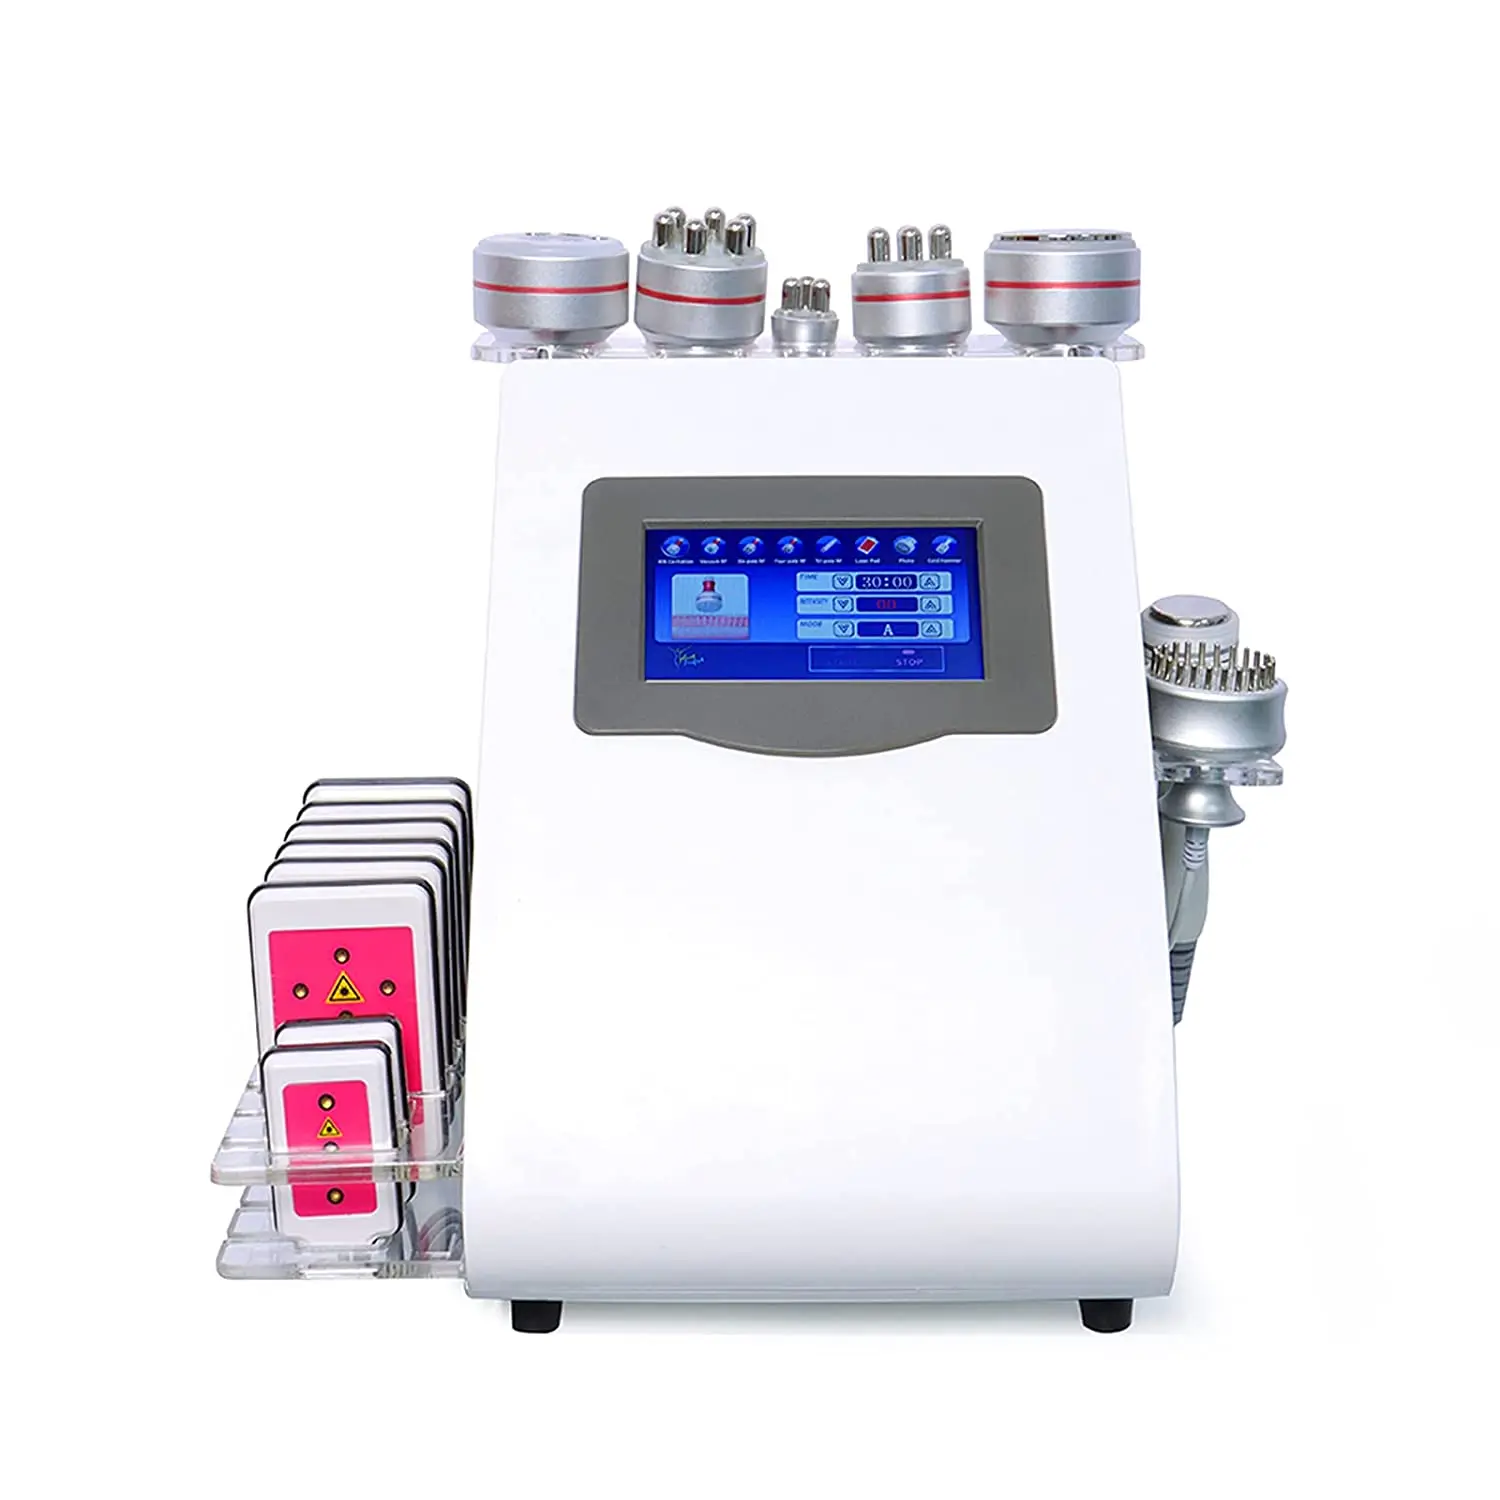 

New Arrival 9 in 1 40K ultrasonic cavitation vacuum radio frequency laser fat laser weight loss machine home body shaping Lipo